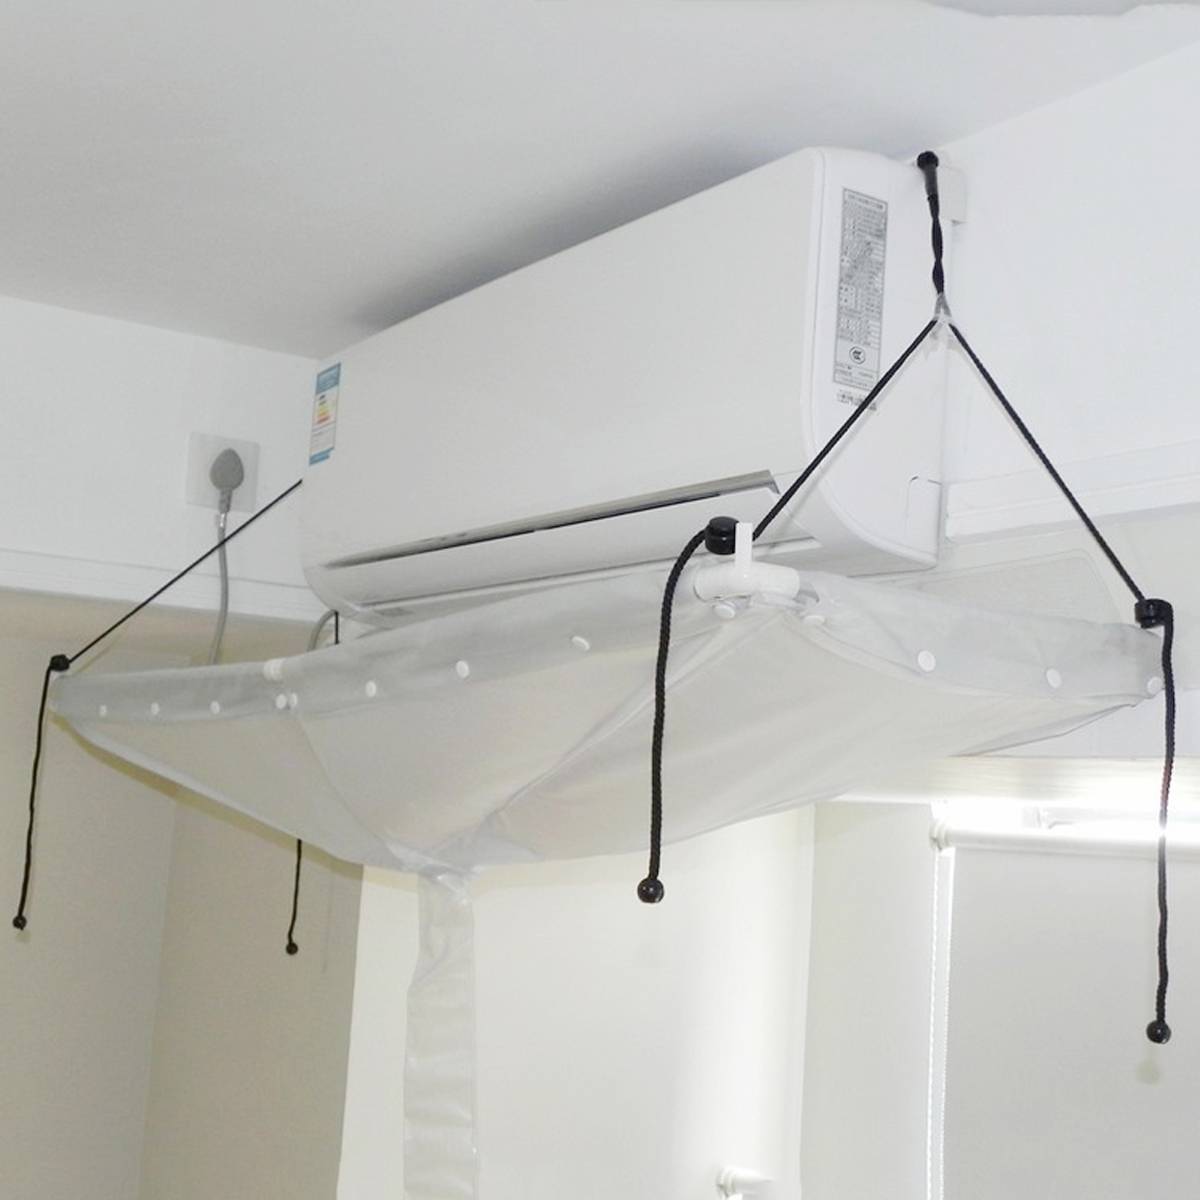 Open Type Air Conditioner Washing Covers Home Ceiling Wall Mounted PVC Air Conditioning Cleaner Washing Cover Dust Cleaning Tool